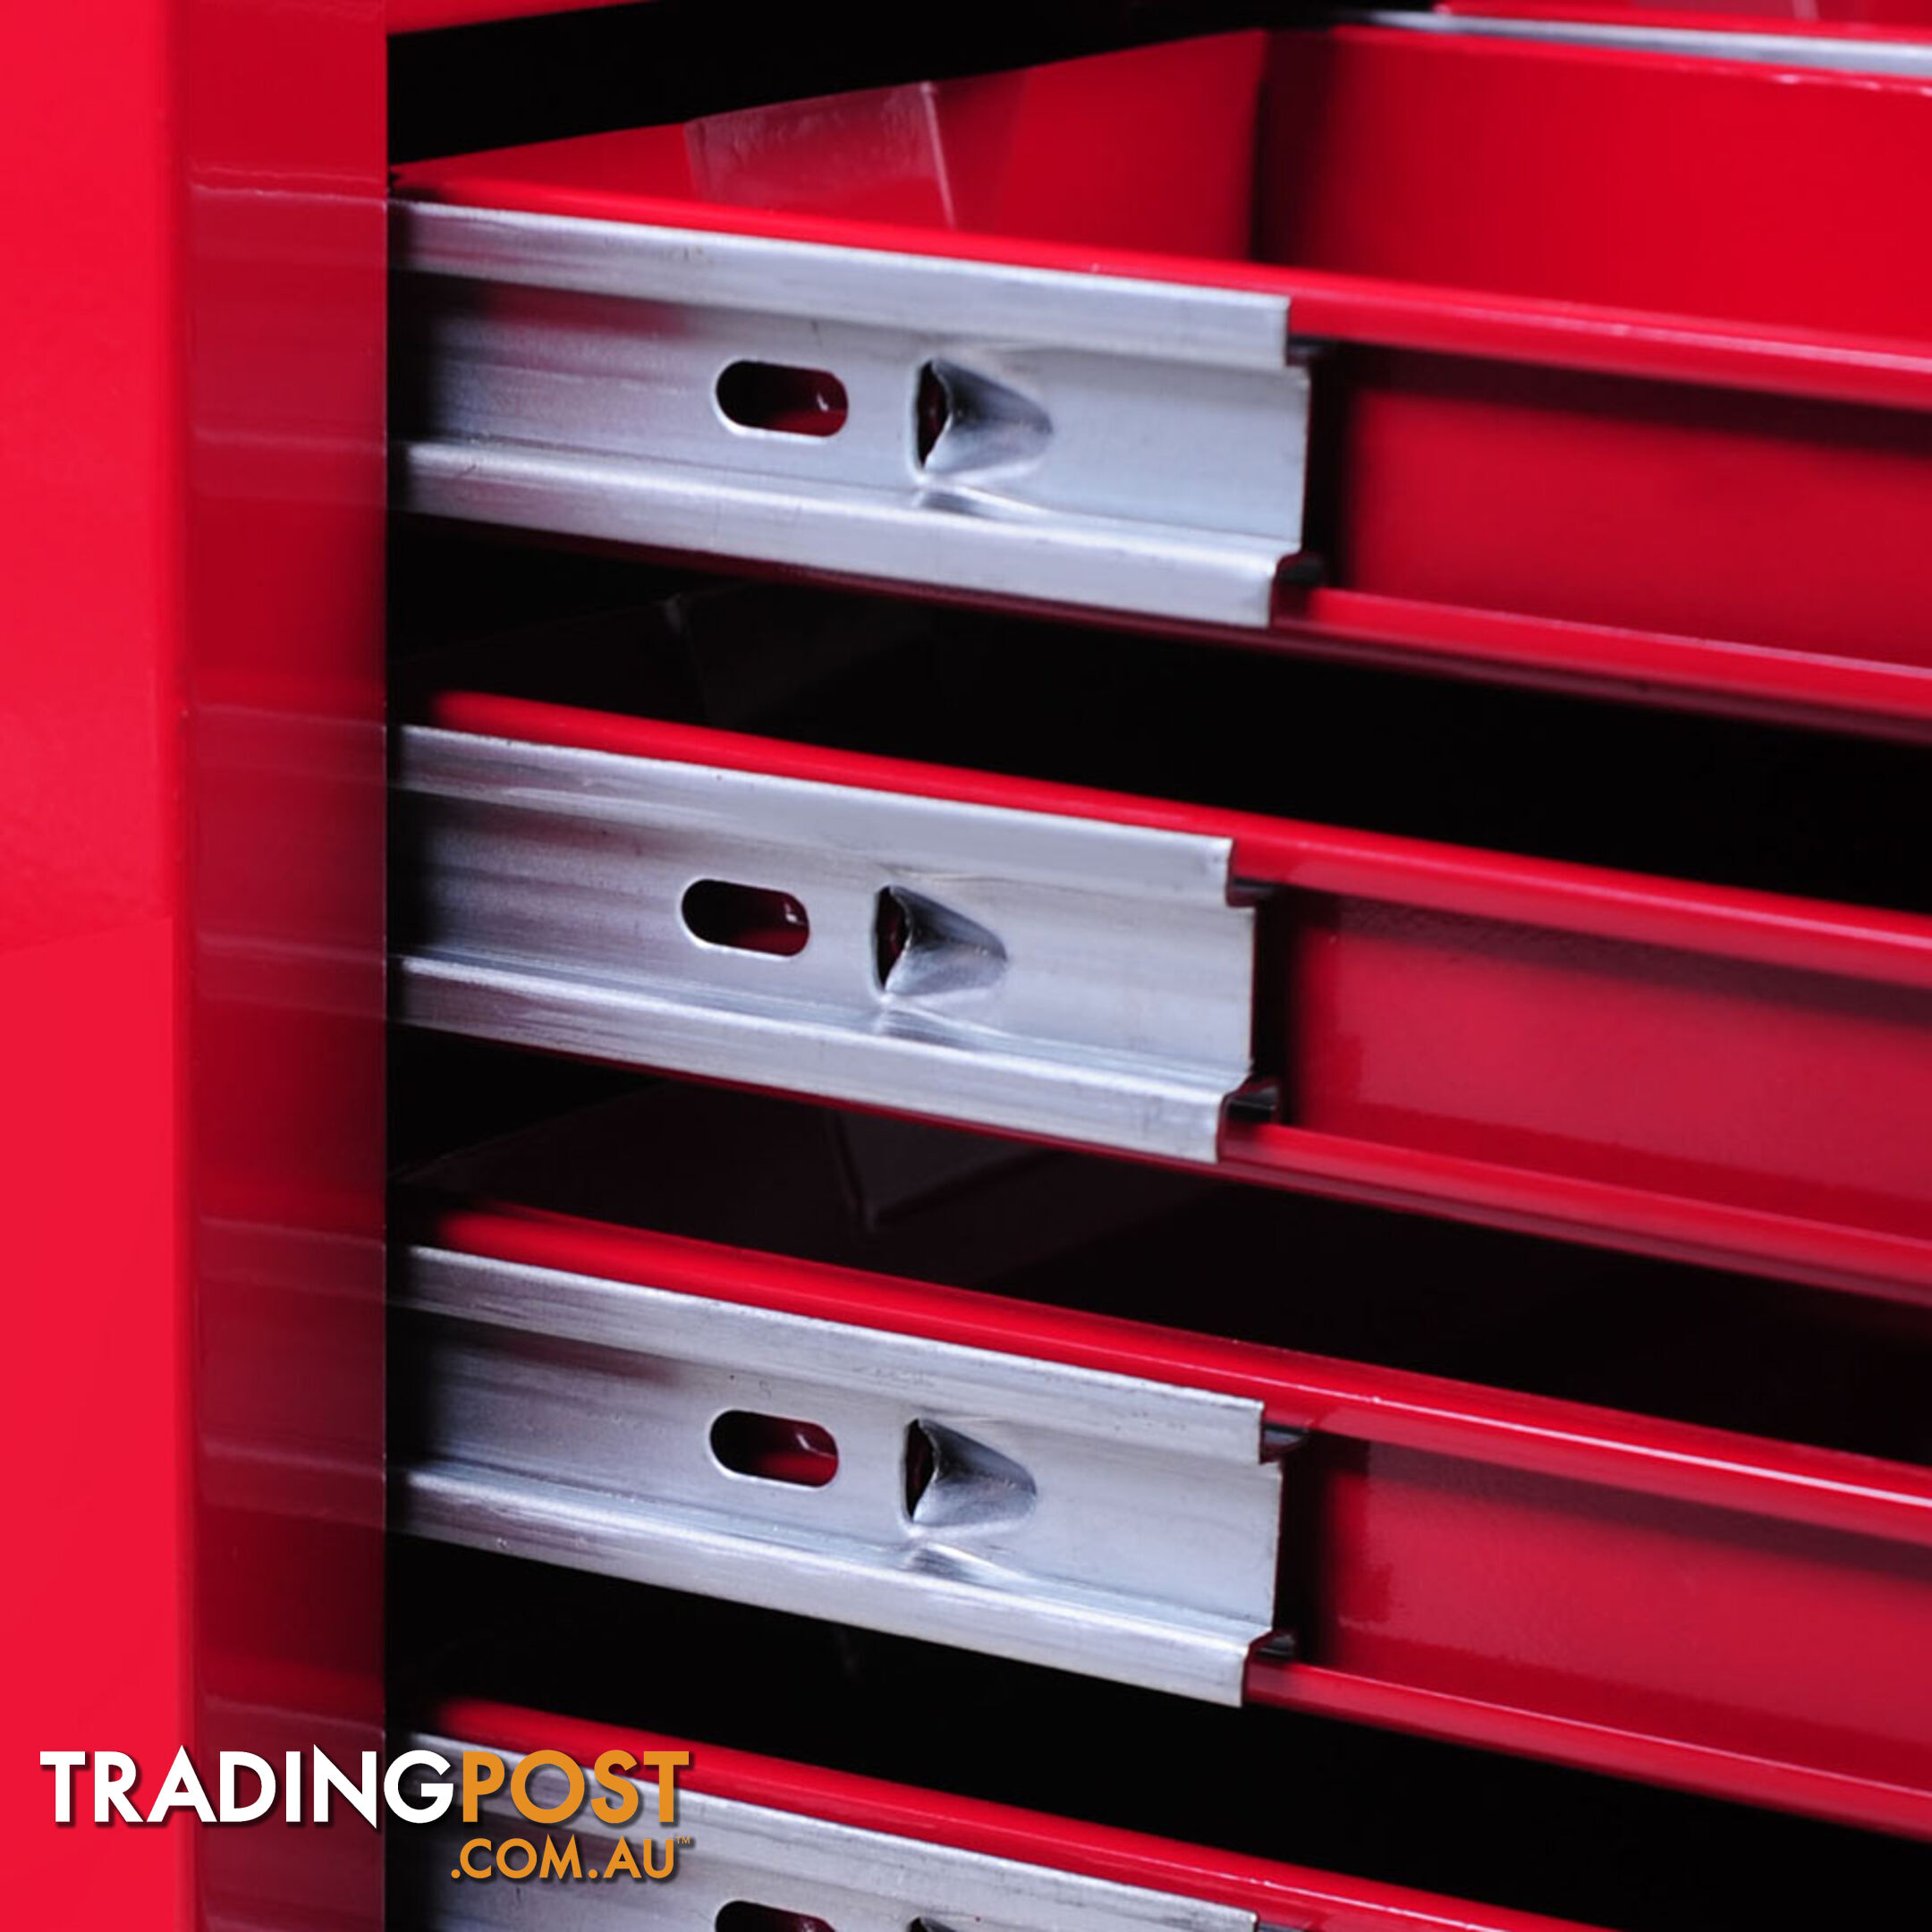 9 Drawers Tool Box Chest Red